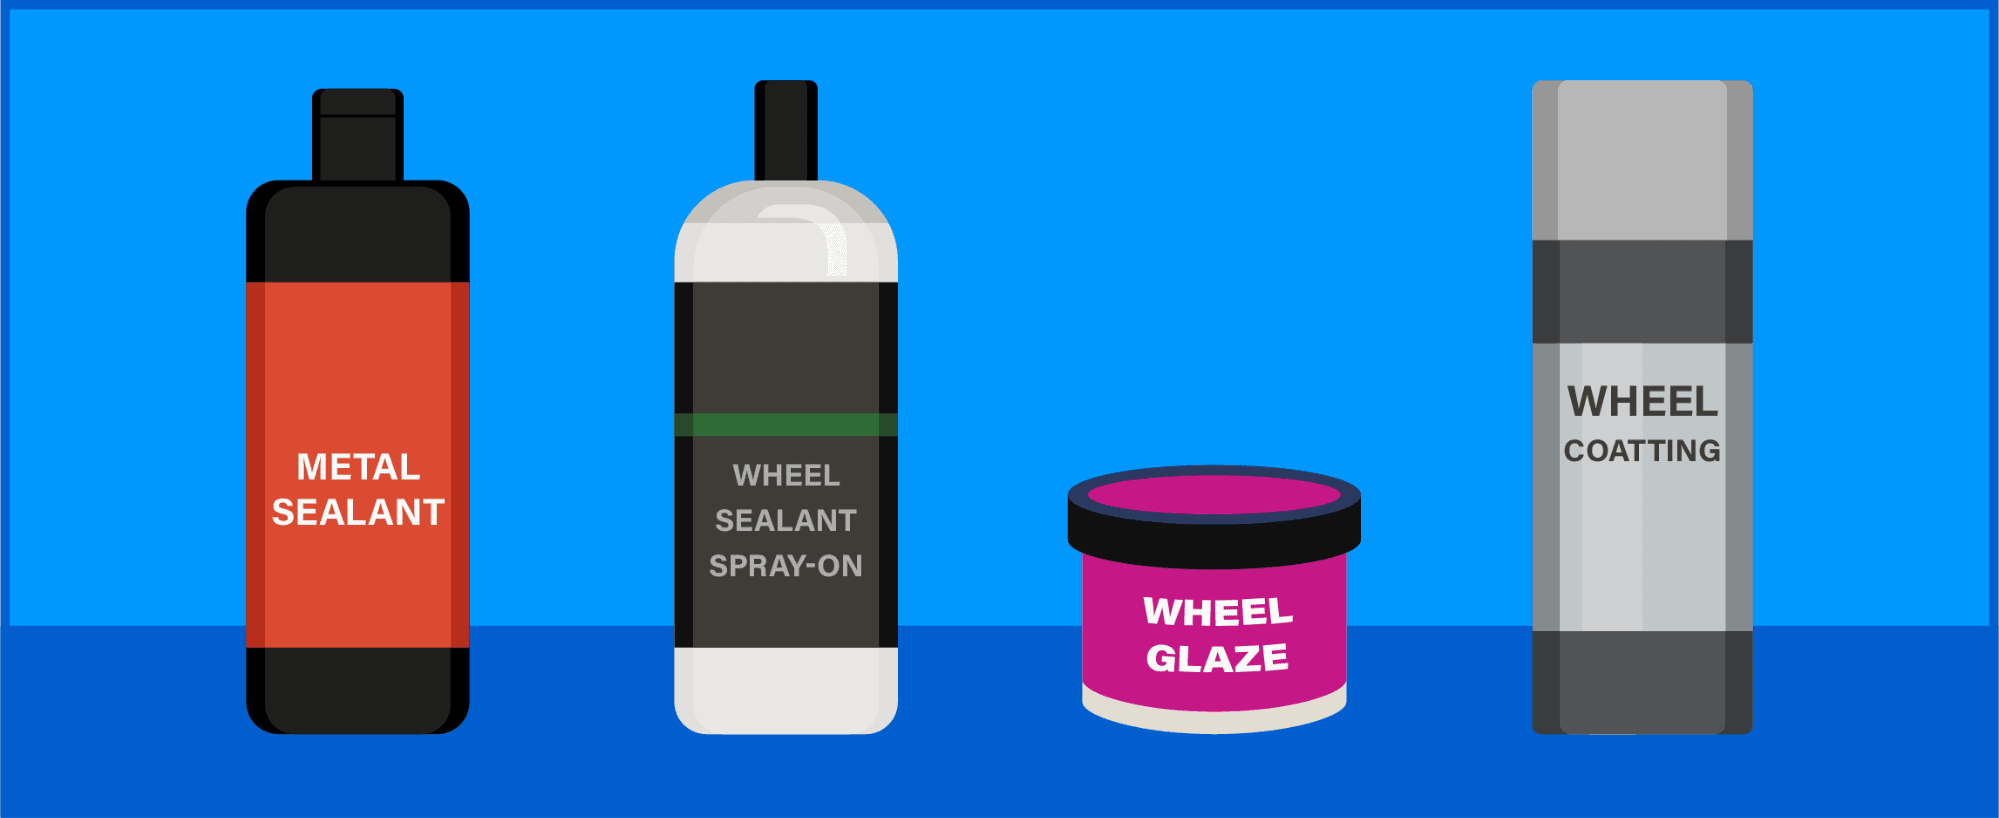 Hot Rims Aluminum Wheel Cleaner.mp4, alloy wheel, Do you need to clean  uncoated, polished, anodized, or powder-coated aluminum wheels? Hot Rims  Aluminum Wheel Cleaner will dissolve dirt, grime, and brake